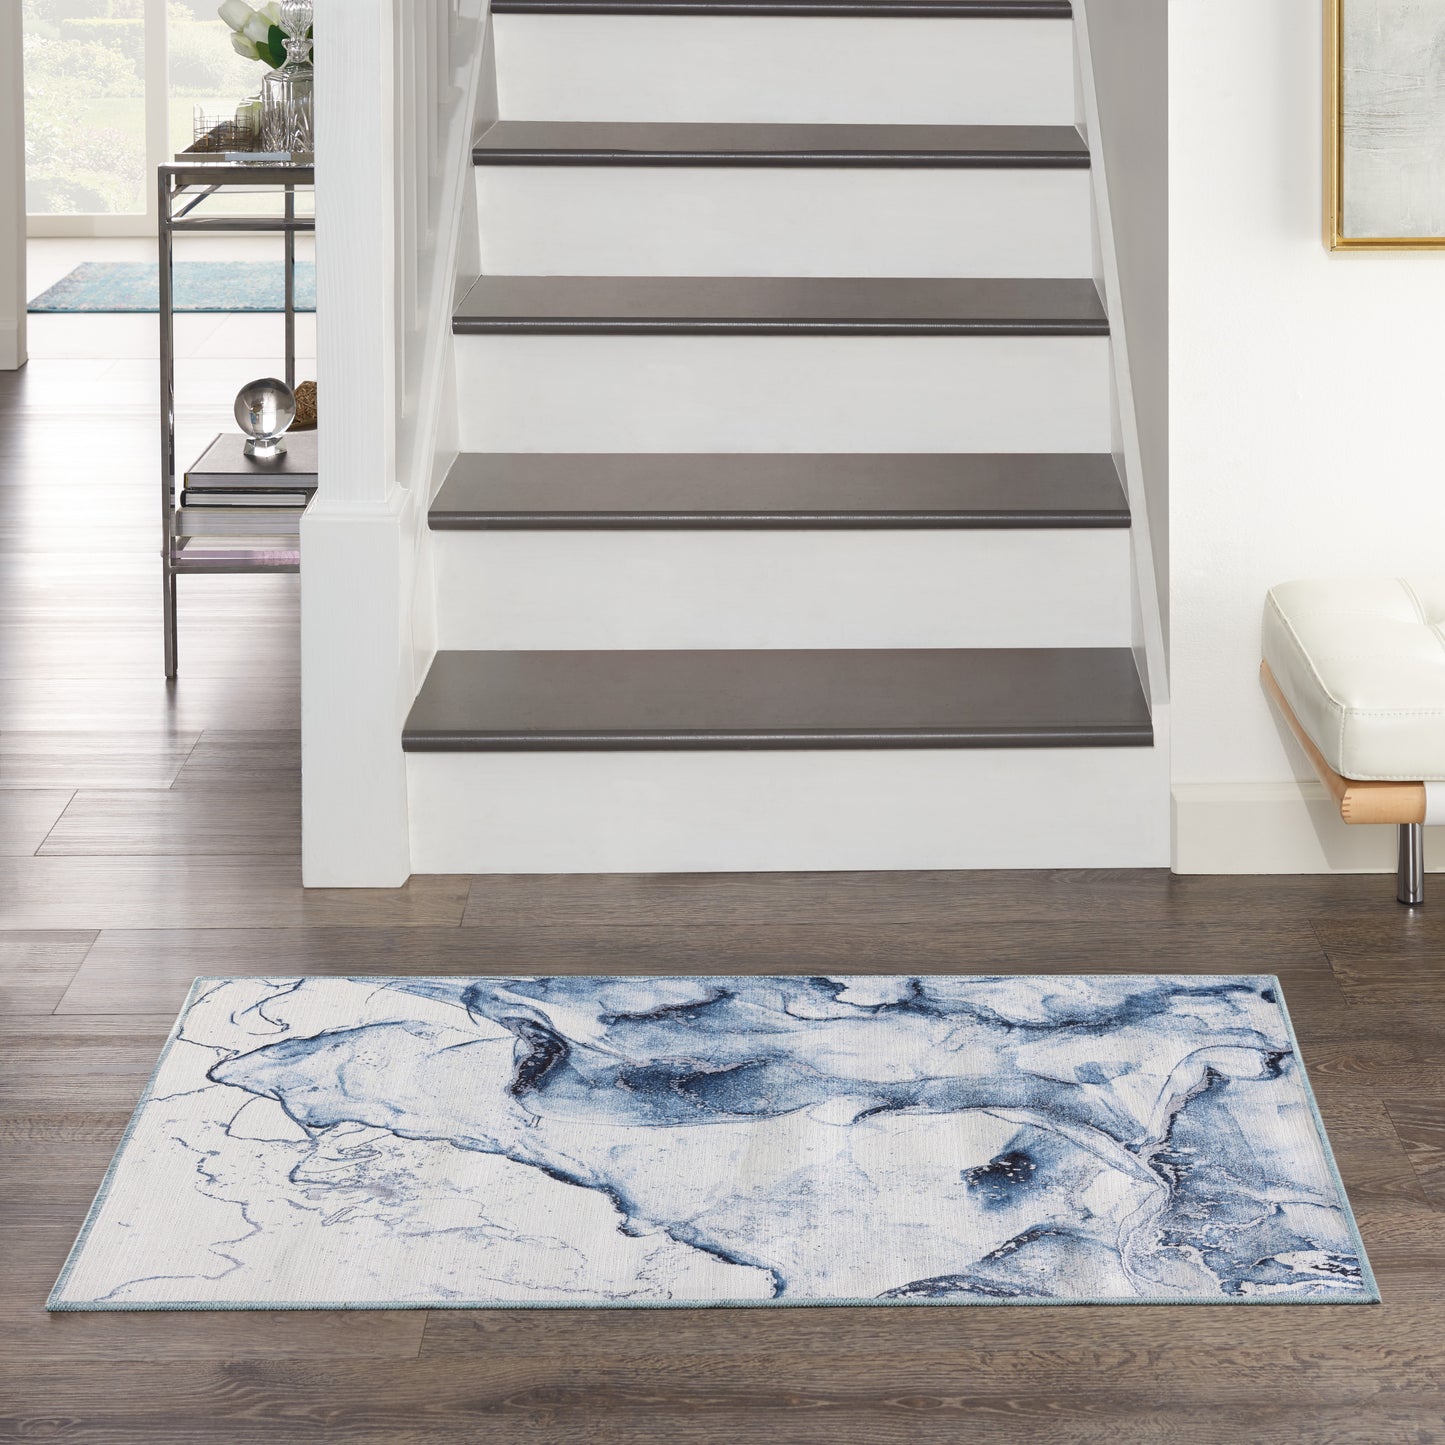 Inspire Me! Home Décor Daydream DDR01 Ivory Blue  Contemporary Machinemade Rug